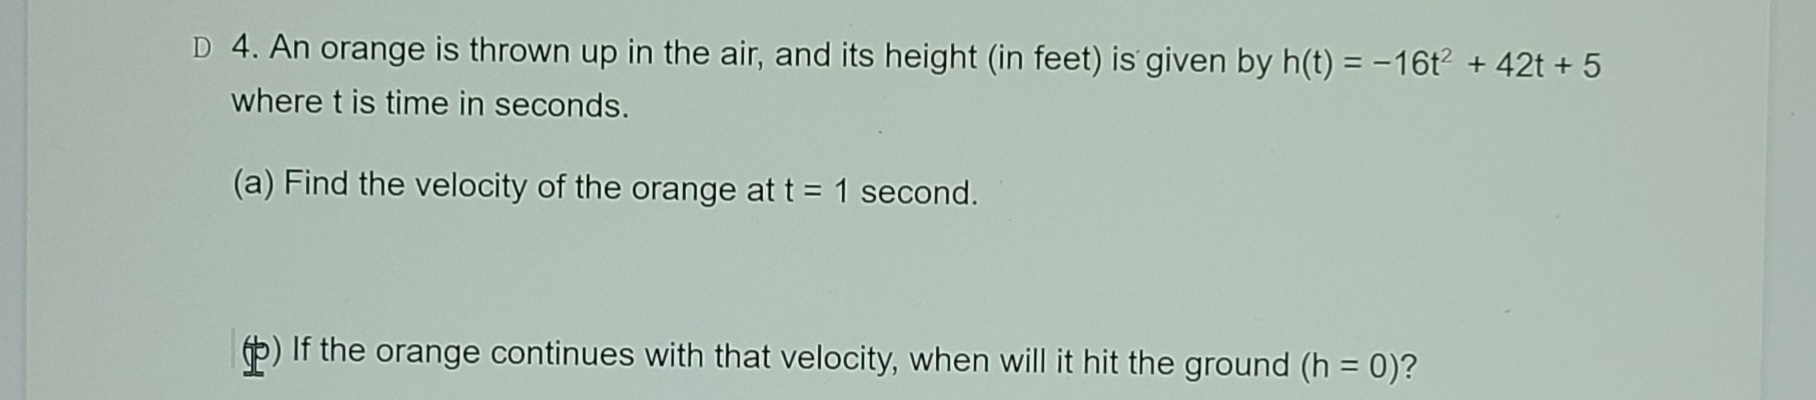 4. An orange is thrown up in the air, and its height (in feet) is given by h(t) = -16t + 42t + 5
where t is time in seconds.
(a) Find the velocity of the orange at t = 1 second.
6) If the orange continues with that velocity, when will it hit the ground (h = 0)?
